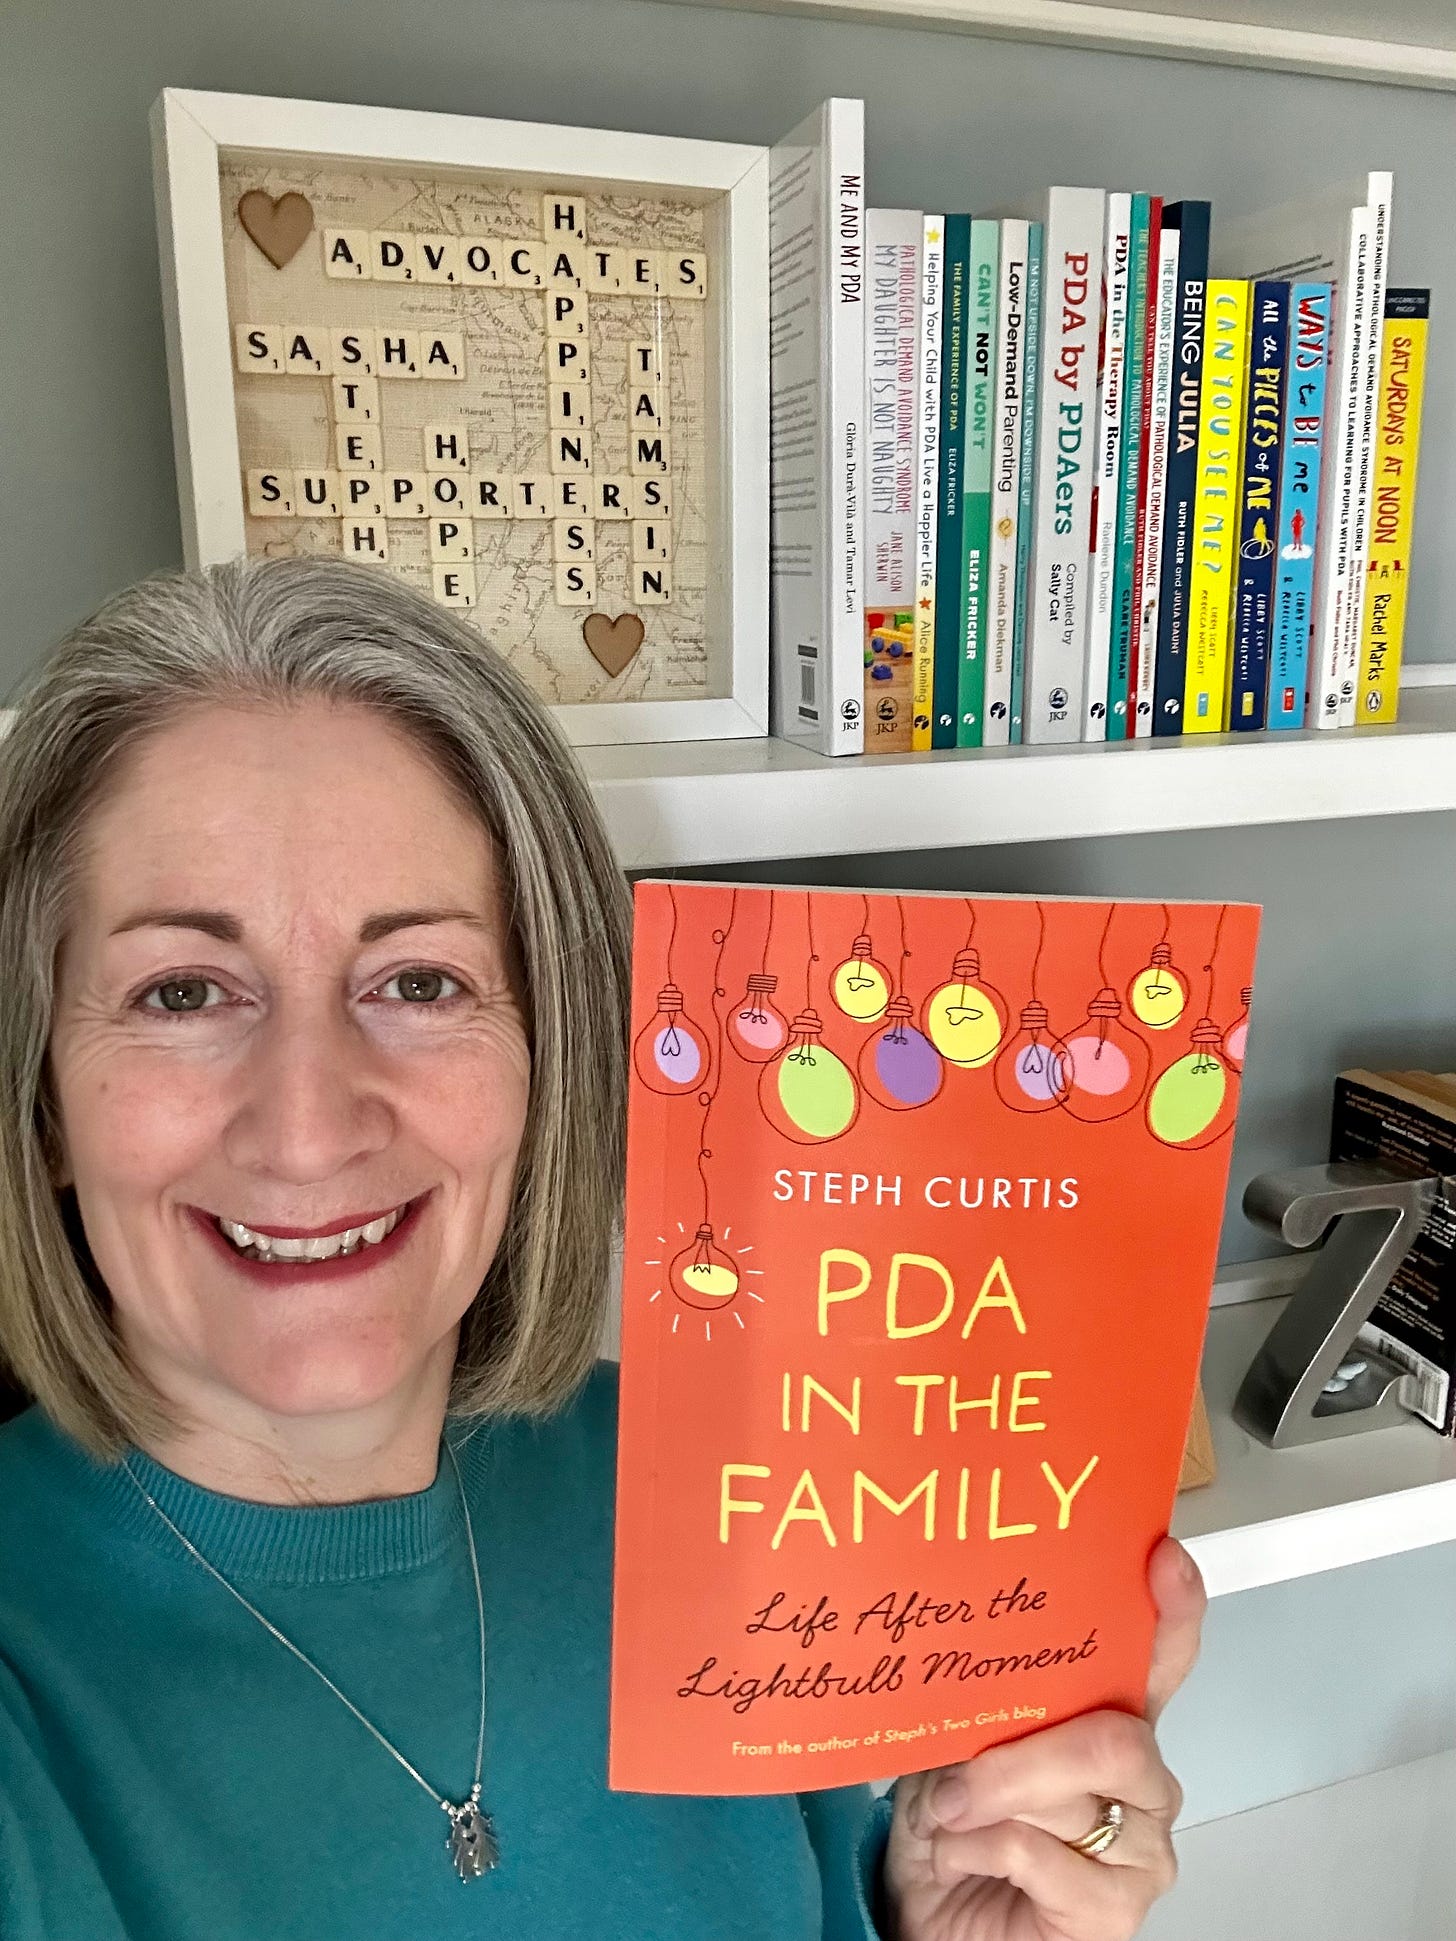 steph, middle aged woman with silver hair standing in front of shelves with pda books on holding up book with orange cover and title pda in the family